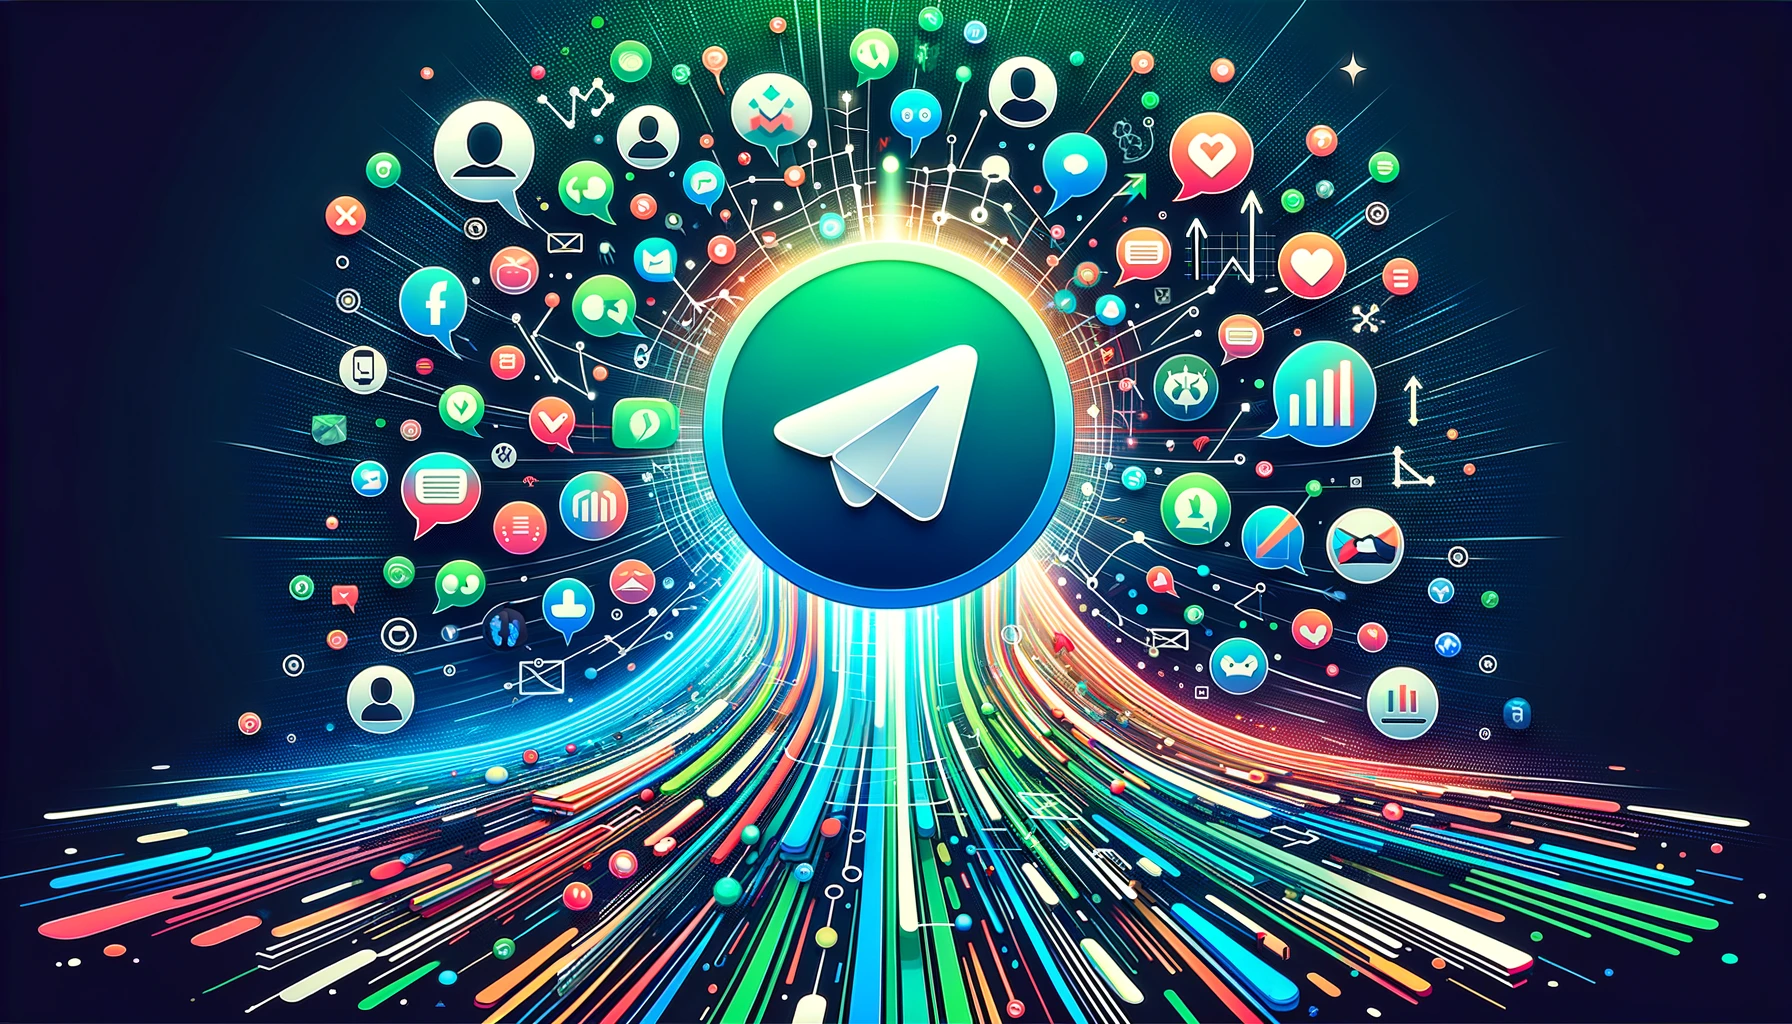 DALL·E 2024 02 16 15.12.10 Design a dynamic and colorful image that represents the growth of a Telegram community. The image should include the Telegram logo prominently at the 